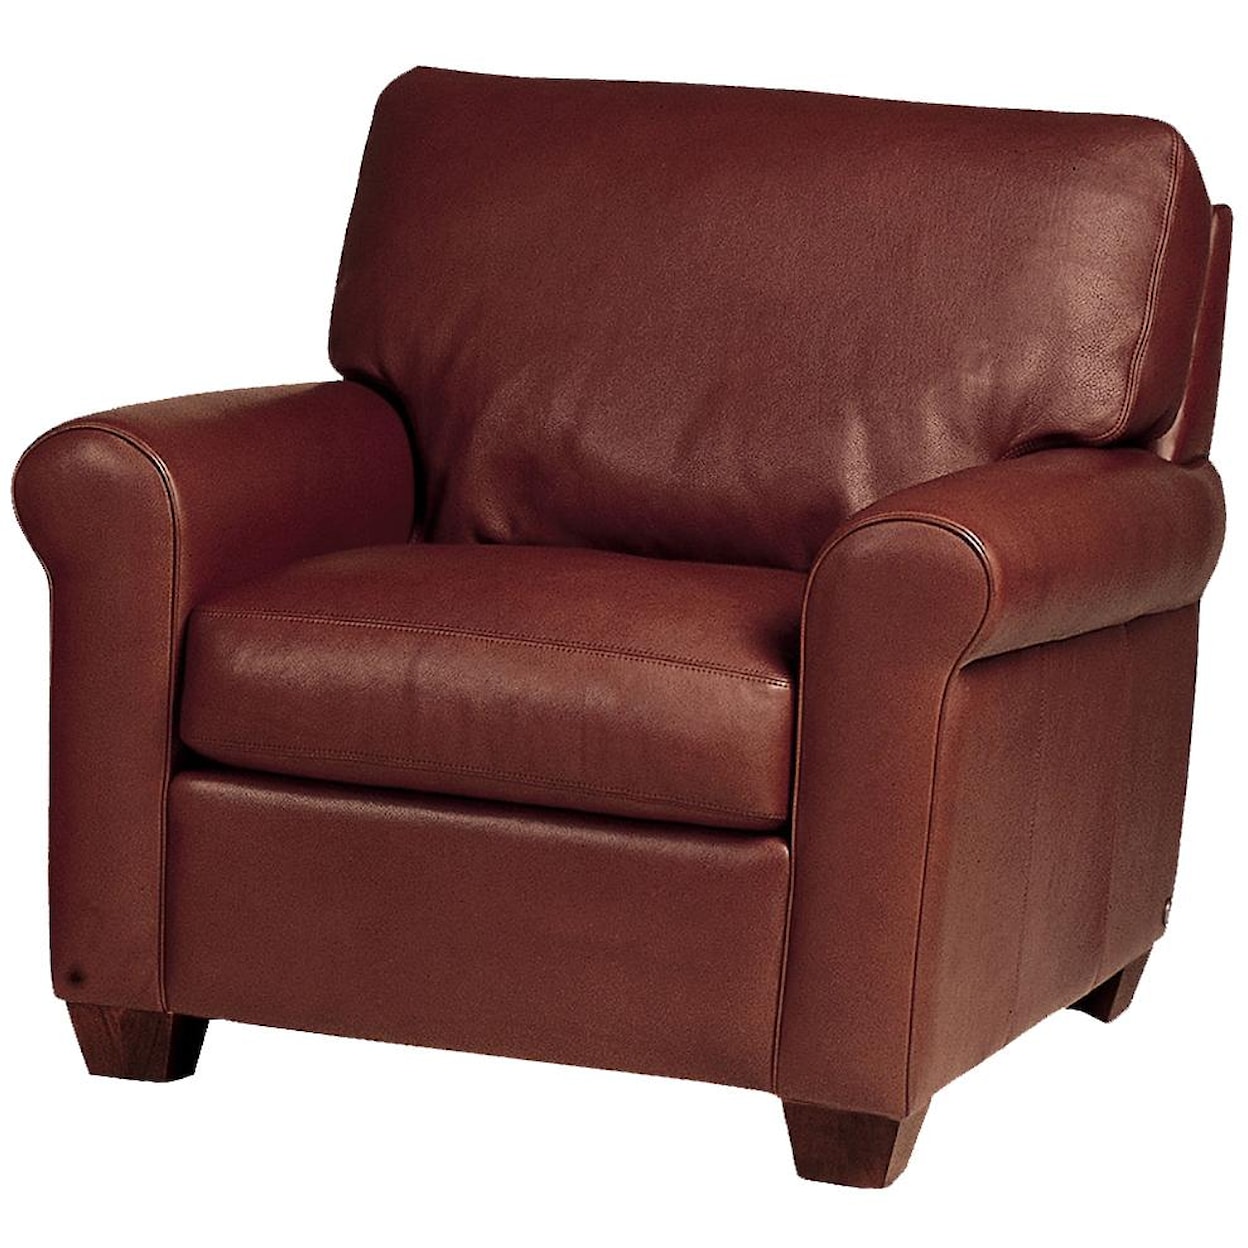 American Leather Savoy Chair